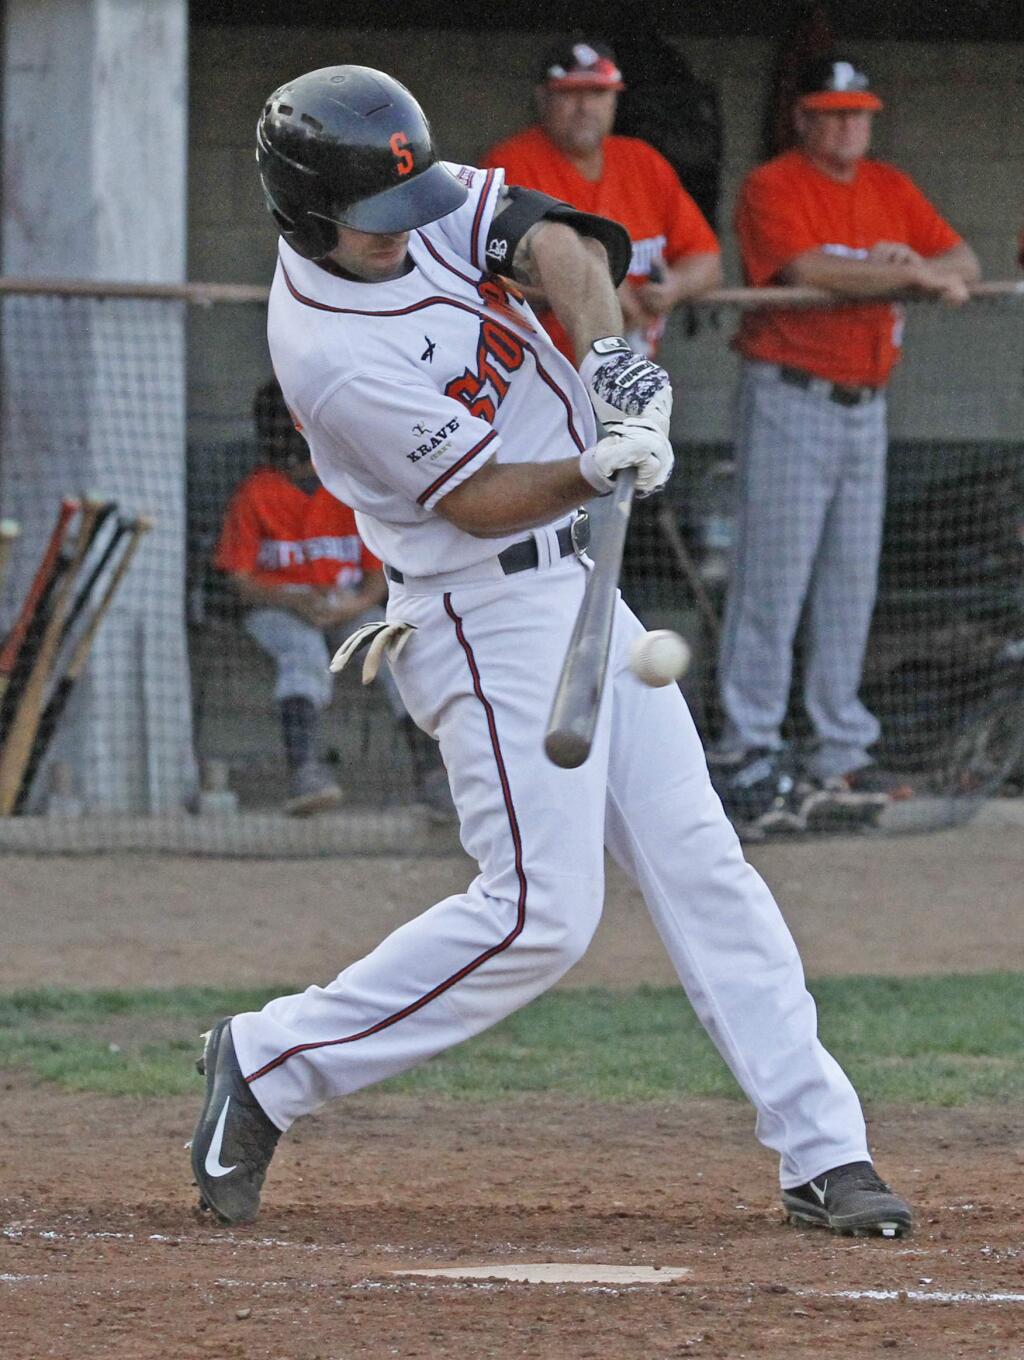 Bill Hoban/Index-TribuneSonoma Stompers' left fielder Brennan Metzger connects fora hit during Friday's game against the Pittsburg Diamonds. Mtezger has a 15-game hitting streak going and is batting .330 on the year.